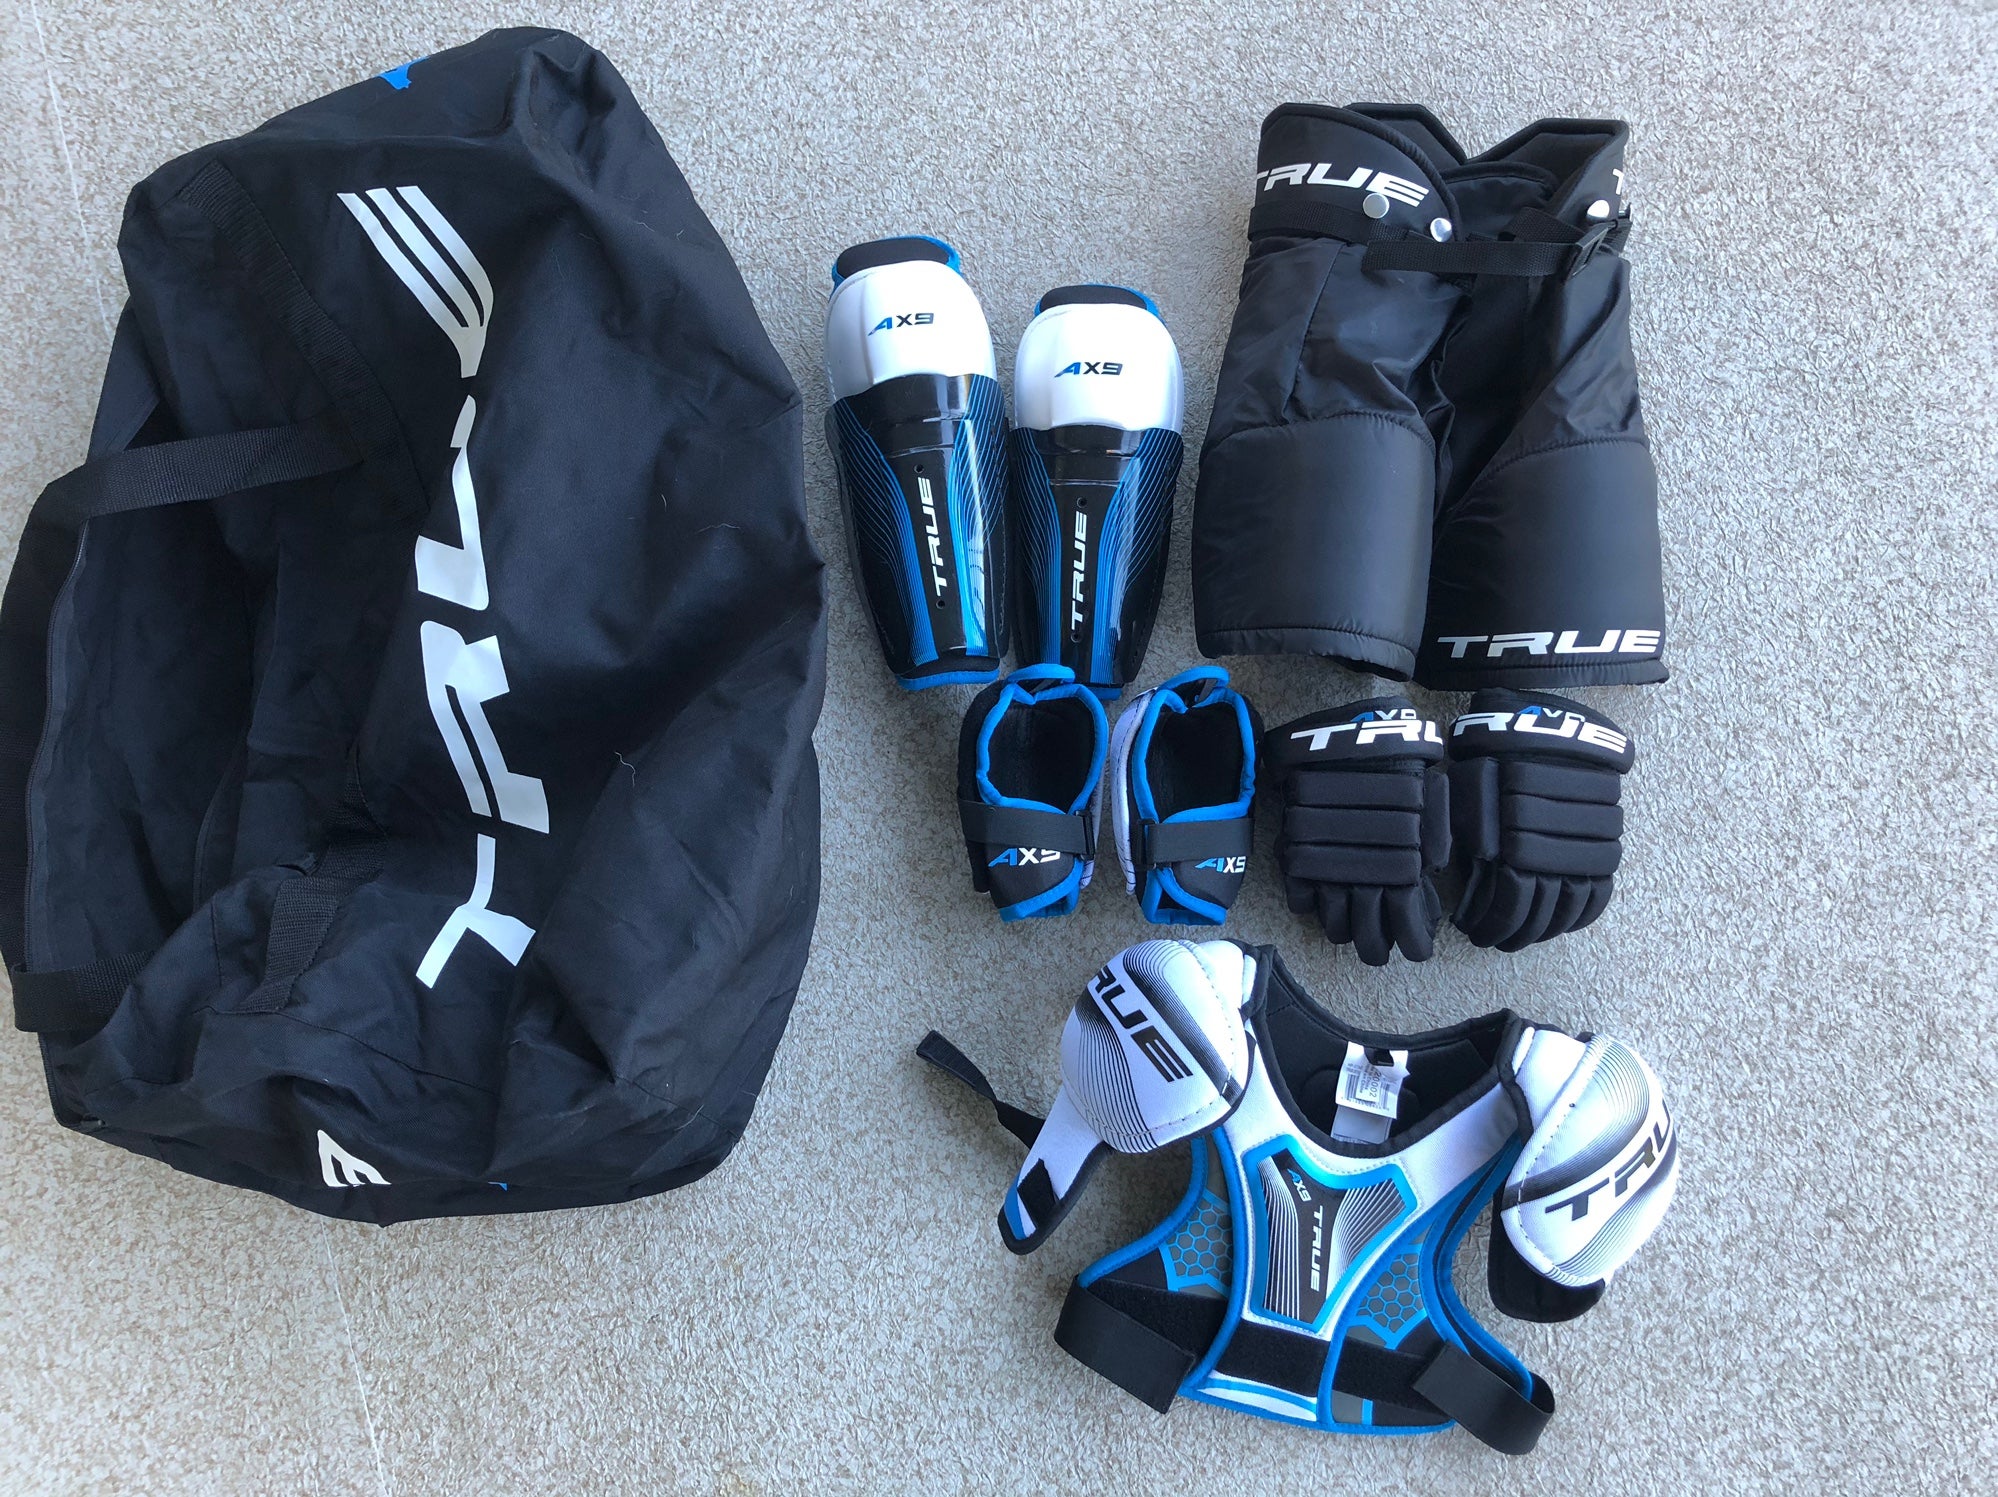 Youth New True Hockey Pants,shoulder Pads,elbow,shin,gloves